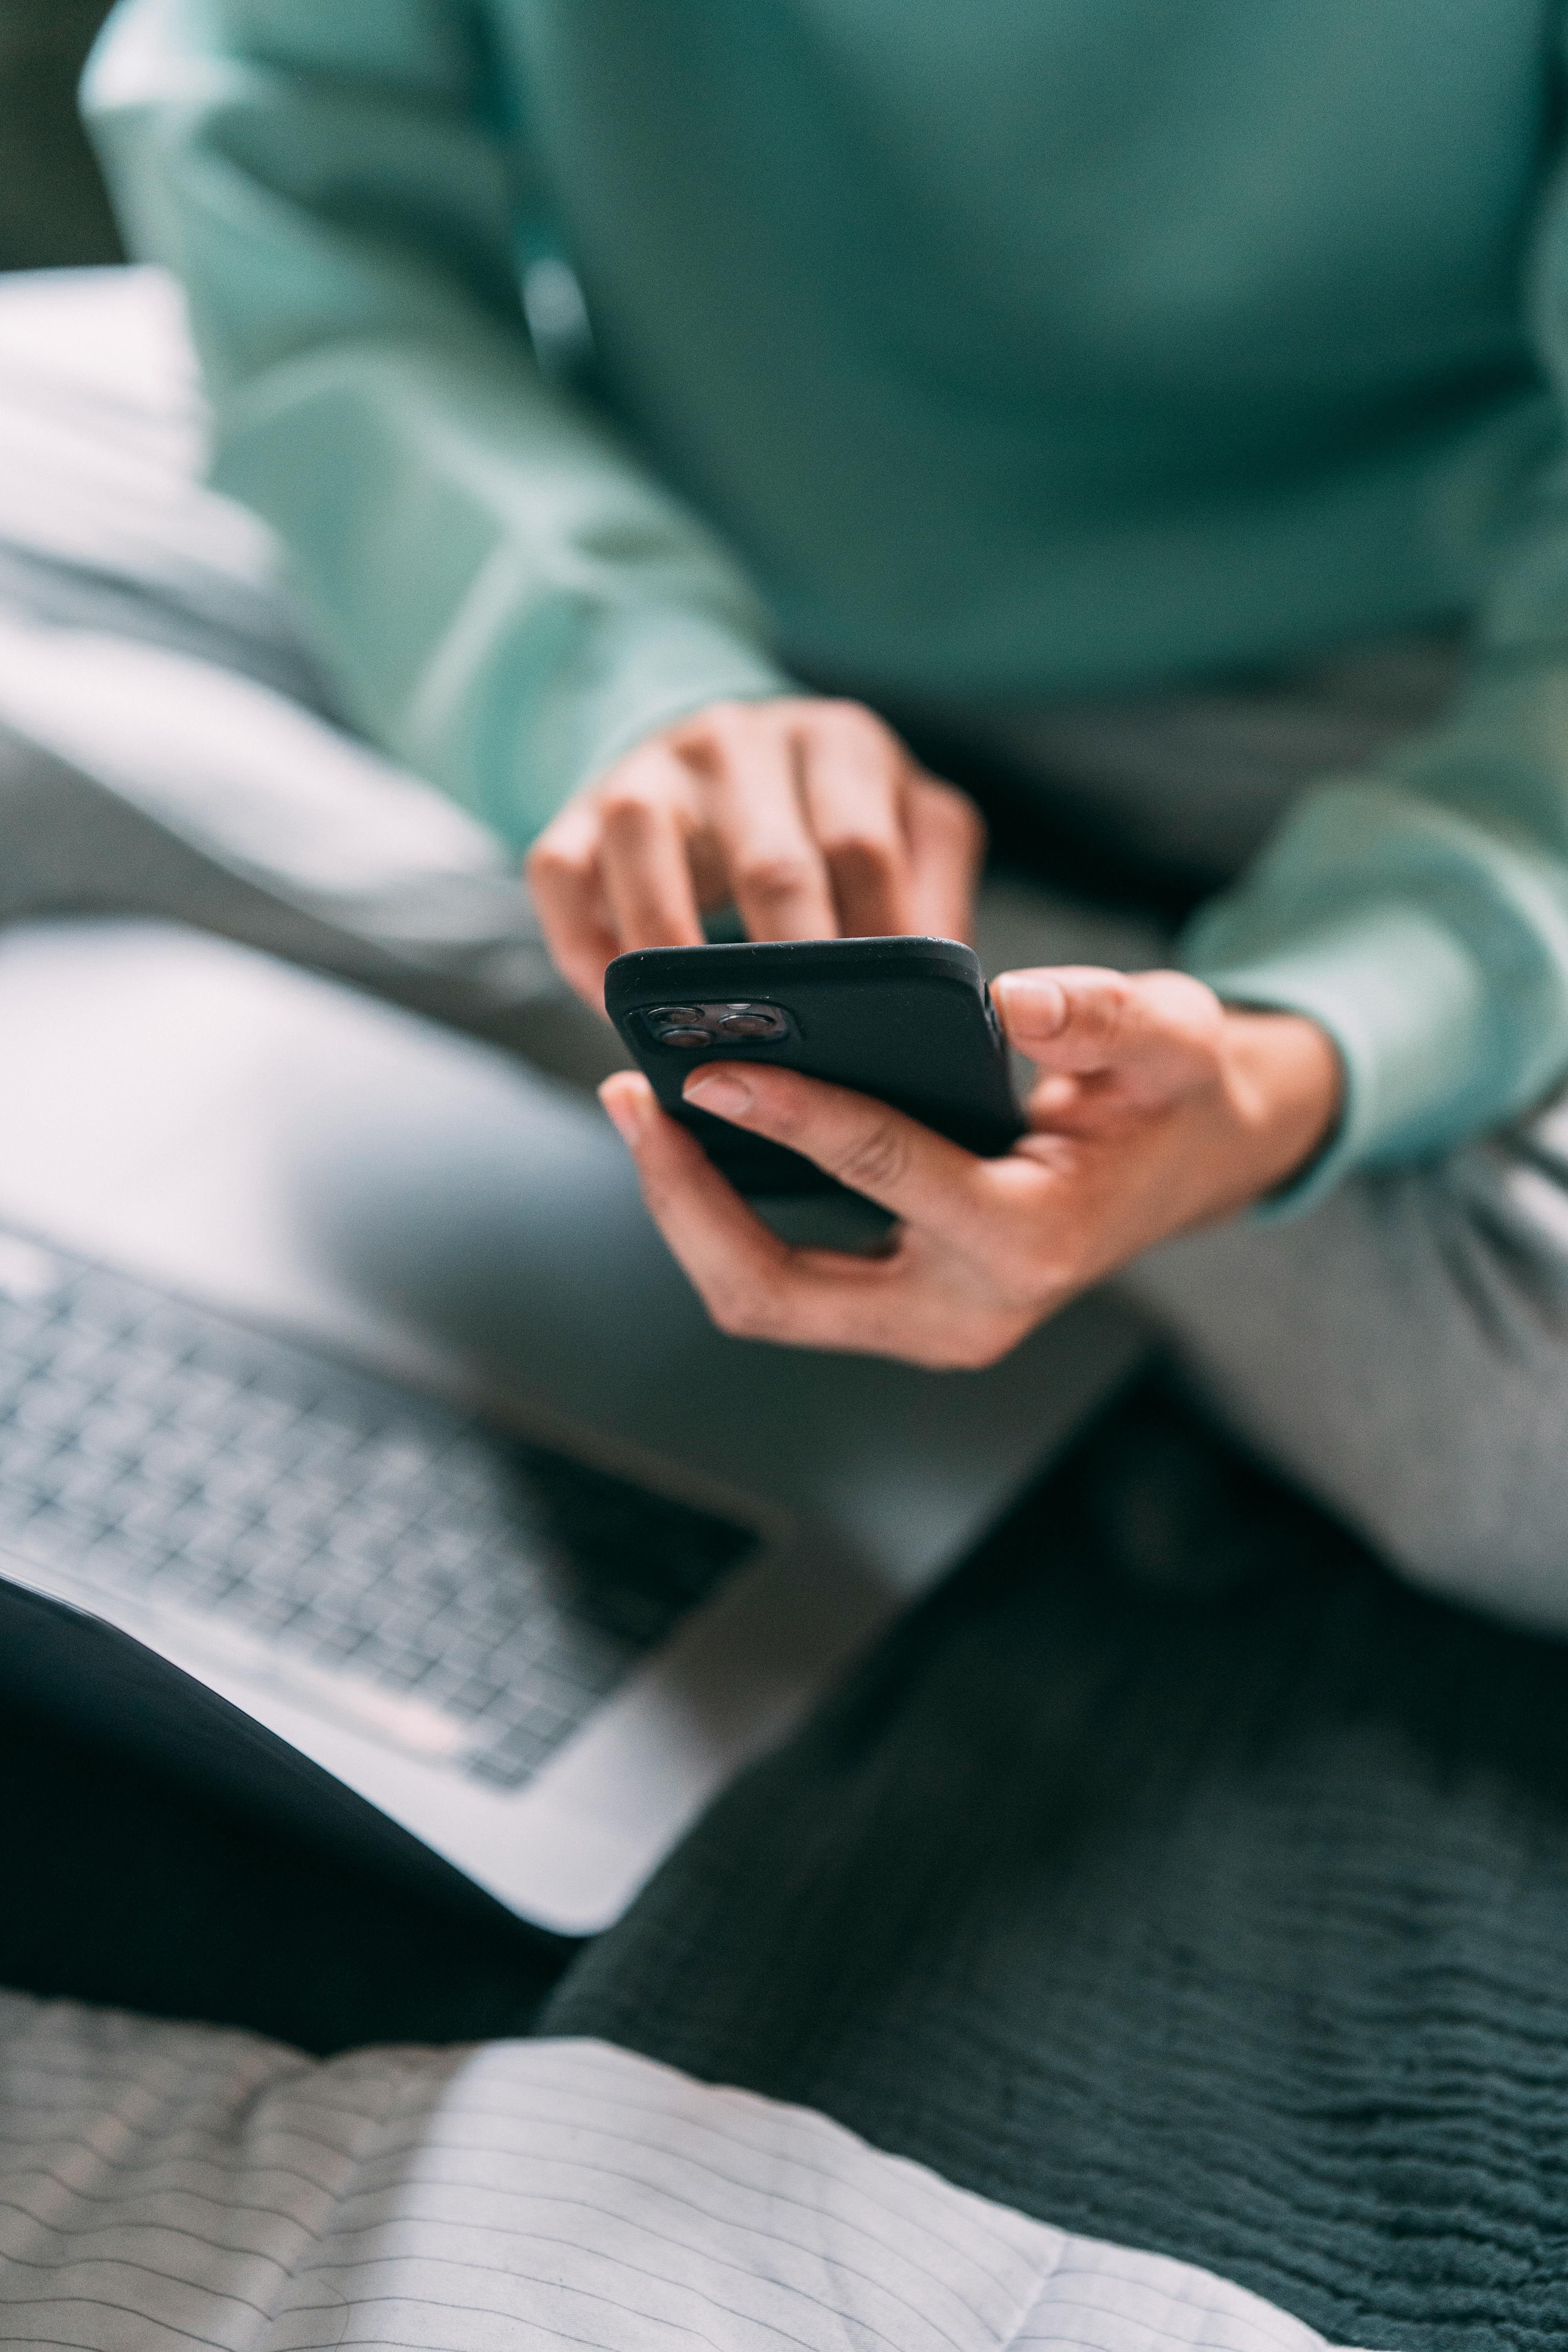 A man reading something on a phone with a laptop in front of him | Source: Pexels